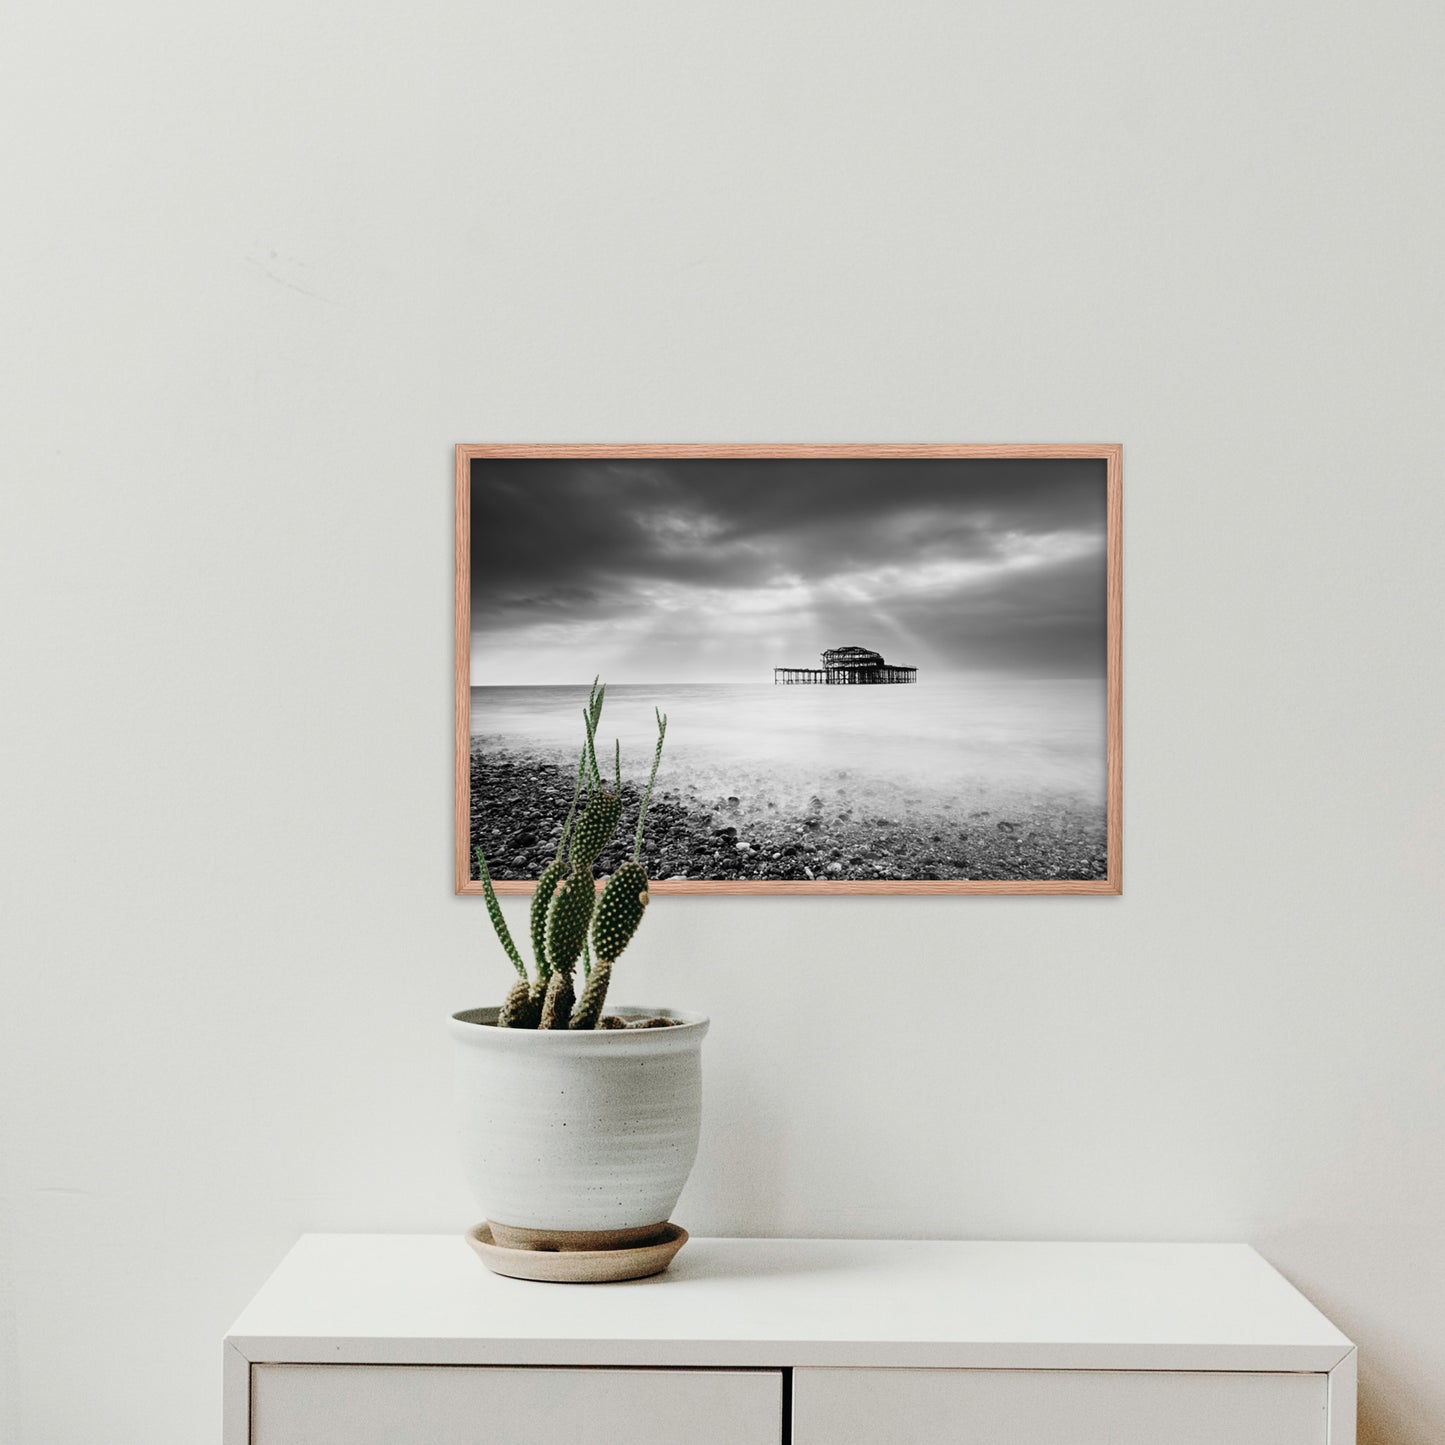 Cool Artwork For Office: Abandoned West Pier Coastal Seascape Landscape Black and White Photograph Framed Wall Art Print